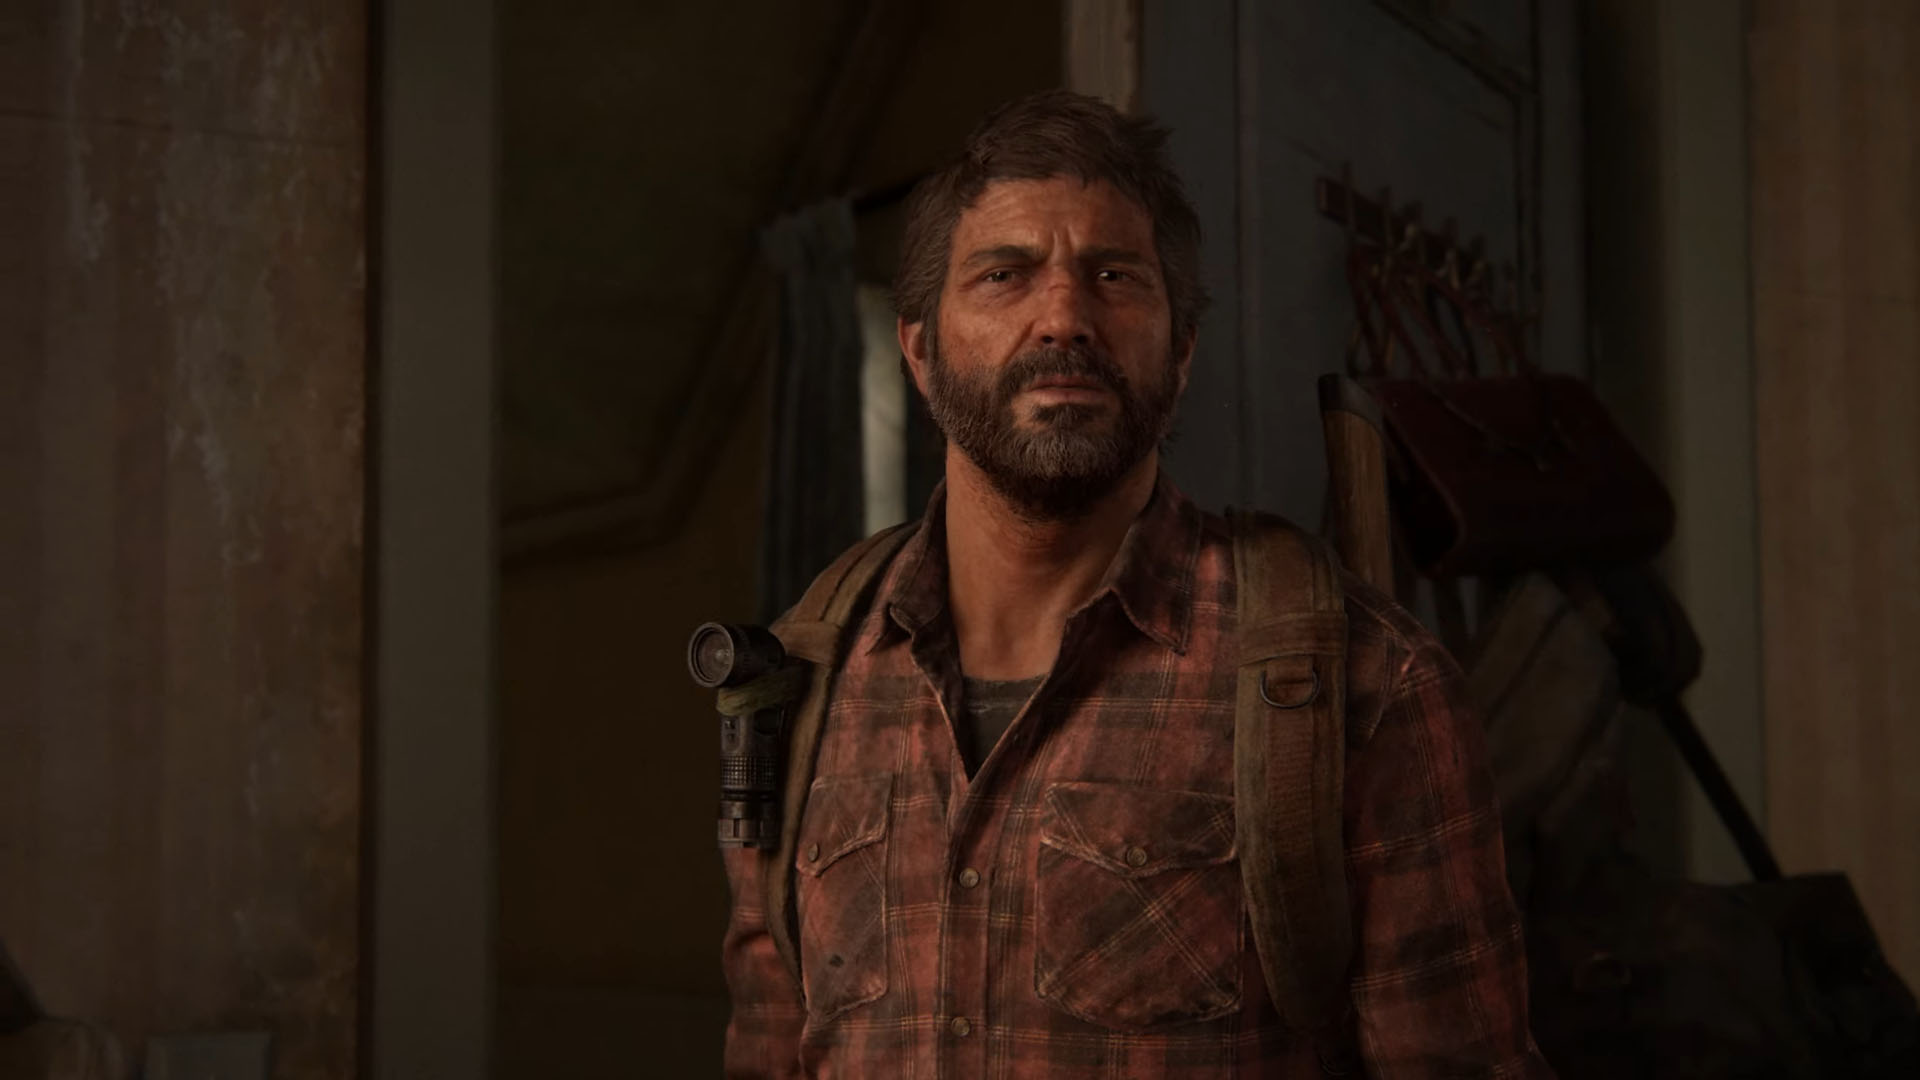 The Last of Us Part I launch trailer revealed ahead of its release